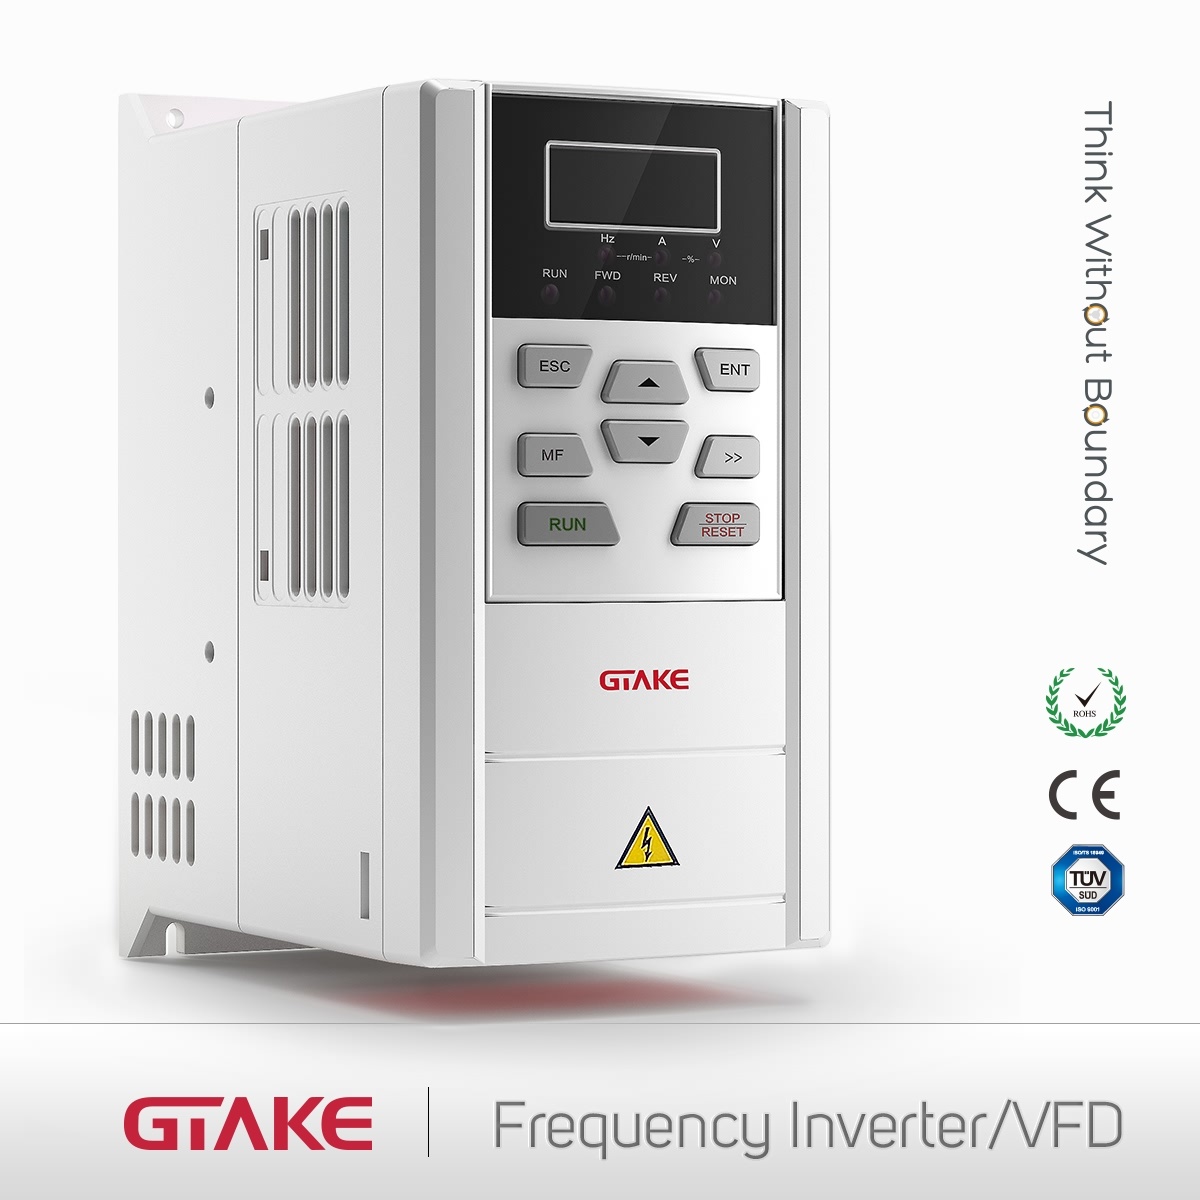 Dedicated VFD Drives for Textile, Spinning, and Knitting Machines